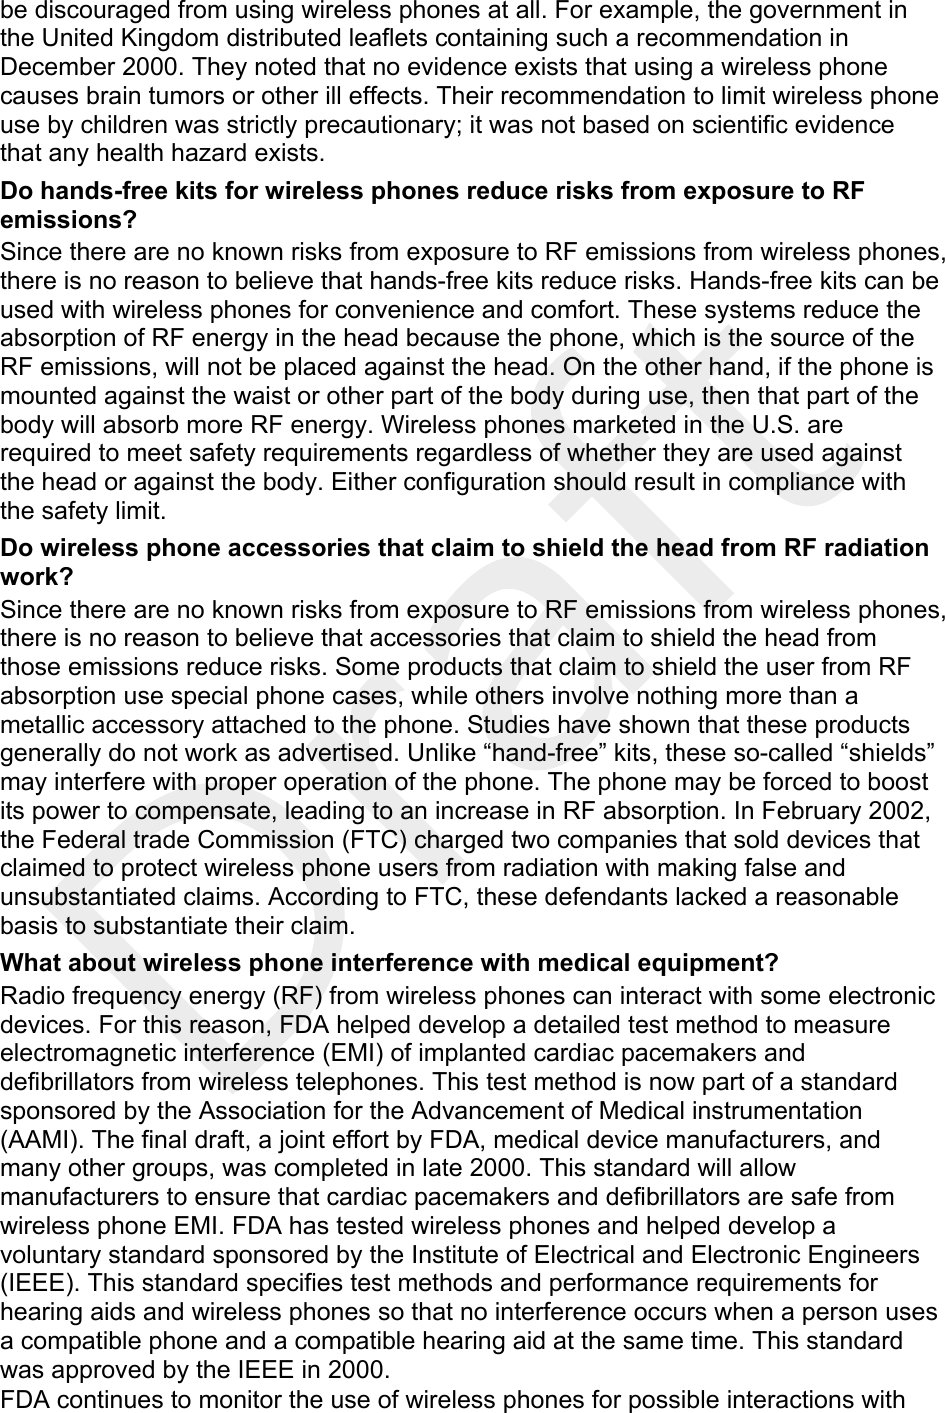  be discouraged from using wireless phones at all. For example, the government in the United Kingdom distributed leaflets containing such a recommendation in December 2000. They noted that no evidence exists that using a wireless phone causes brain tumors or other ill effects. Their recommendation to limit wireless phone use by children was strictly precautionary; it was not based on scientific evidence that any health hazard exists.   Do hands-free kits for wireless phones reduce risks from exposure to RF emissions? Since there are no known risks from exposure to RF emissions from wireless phones, there is no reason to believe that hands-free kits reduce risks. Hands-free kits can be used with wireless phones for convenience and comfort. These systems reduce the absorption of RF energy in the head because the phone, which is the source of the RF emissions, will not be placed against the head. On the other hand, if the phone is mounted against the waist or other part of the body during use, then that part of the body will absorb more RF energy. Wireless phones marketed in the U.S. are required to meet safety requirements regardless of whether they are used against the head or against the body. Either configuration should result in compliance with the safety limit. Do wireless phone accessories that claim to shield the head from RF radiation work? Since there are no known risks from exposure to RF emissions from wireless phones, there is no reason to believe that accessories that claim to shield the head from those emissions reduce risks. Some products that claim to shield the user from RF absorption use special phone cases, while others involve nothing more than a metallic accessory attached to the phone. Studies have shown that these products generally do not work as advertised. Unlike “hand-free” kits, these so-called “shields” may interfere with proper operation of the phone. The phone may be forced to boost its power to compensate, leading to an increase in RF absorption. In February 2002, the Federal trade Commission (FTC) charged two companies that sold devices that claimed to protect wireless phone users from radiation with making false and unsubstantiated claims. According to FTC, these defendants lacked a reasonable basis to substantiate their claim. What about wireless phone interference with medical equipment? Radio frequency energy (RF) from wireless phones can interact with some electronic devices. For this reason, FDA helped develop a detailed test method to measure electromagnetic interference (EMI) of implanted cardiac pacemakers and defibrillators from wireless telephones. This test method is now part of a standard sponsored by the Association for the Advancement of Medical instrumentation (AAMI). The final draft, a joint effort by FDA, medical device manufacturers, and many other groups, was completed in late 2000. This standard will allow manufacturers to ensure that cardiac pacemakers and defibrillators are safe from wireless phone EMI. FDA has tested wireless phones and helped develop a voluntary standard sponsored by the Institute of Electrical and Electronic Engineers (IEEE). This standard specifies test methods and performance requirements for hearing aids and wireless phones so that no interference occurs when a person uses a compatible phone and a compatible hearing aid at the same time. This standard was approved by the IEEE in 2000. FDA continues to monitor the use of wireless phones for possible interactions with 